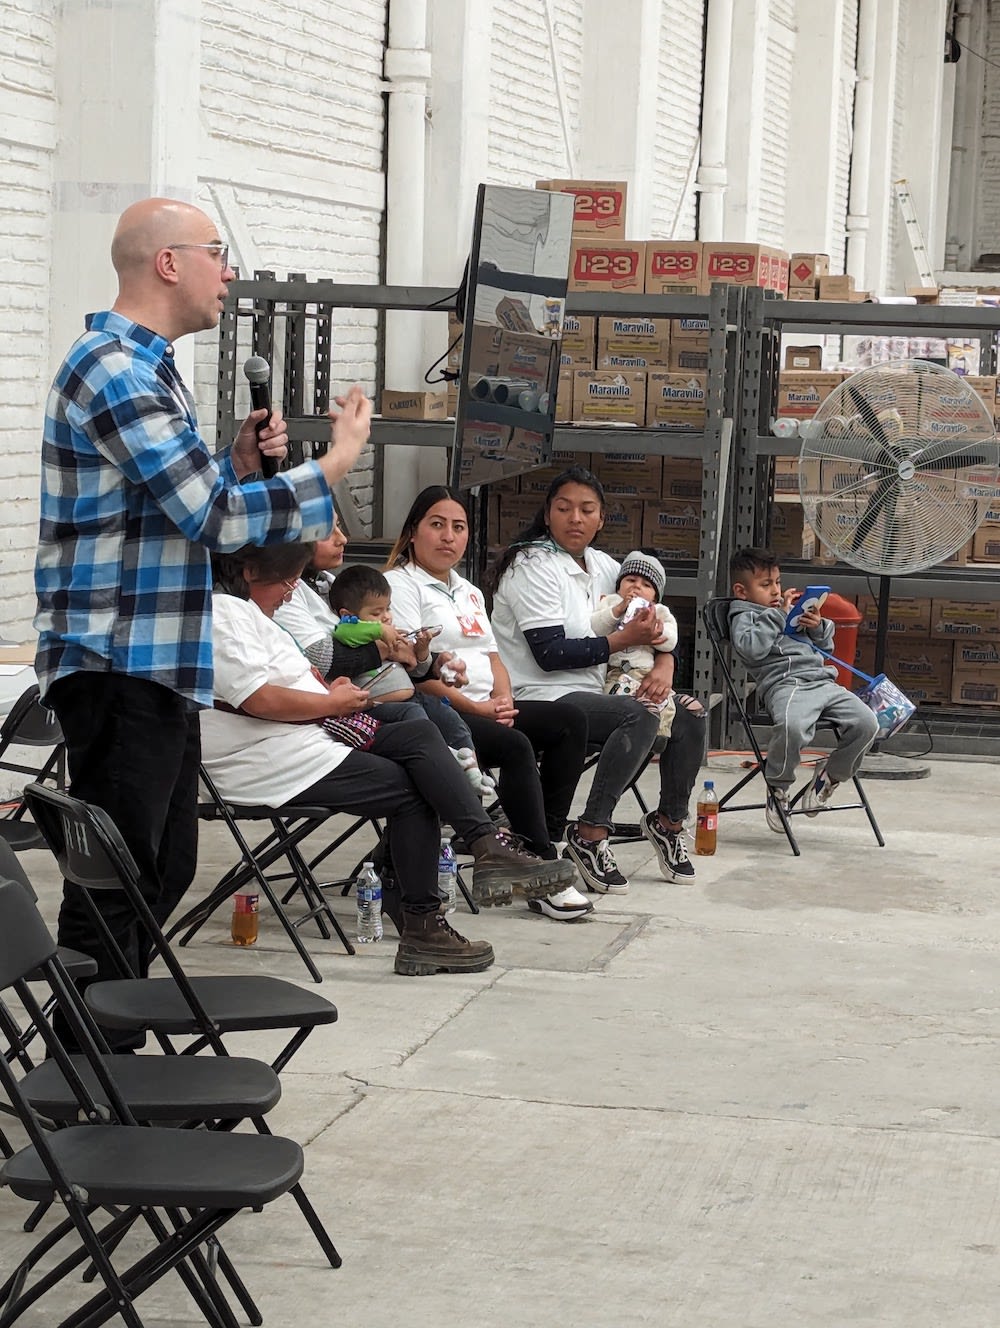 Ady, CEO of Nilus, along with a team of Community Leaders, presenting Nilus' work at their warehouse in Mexico City